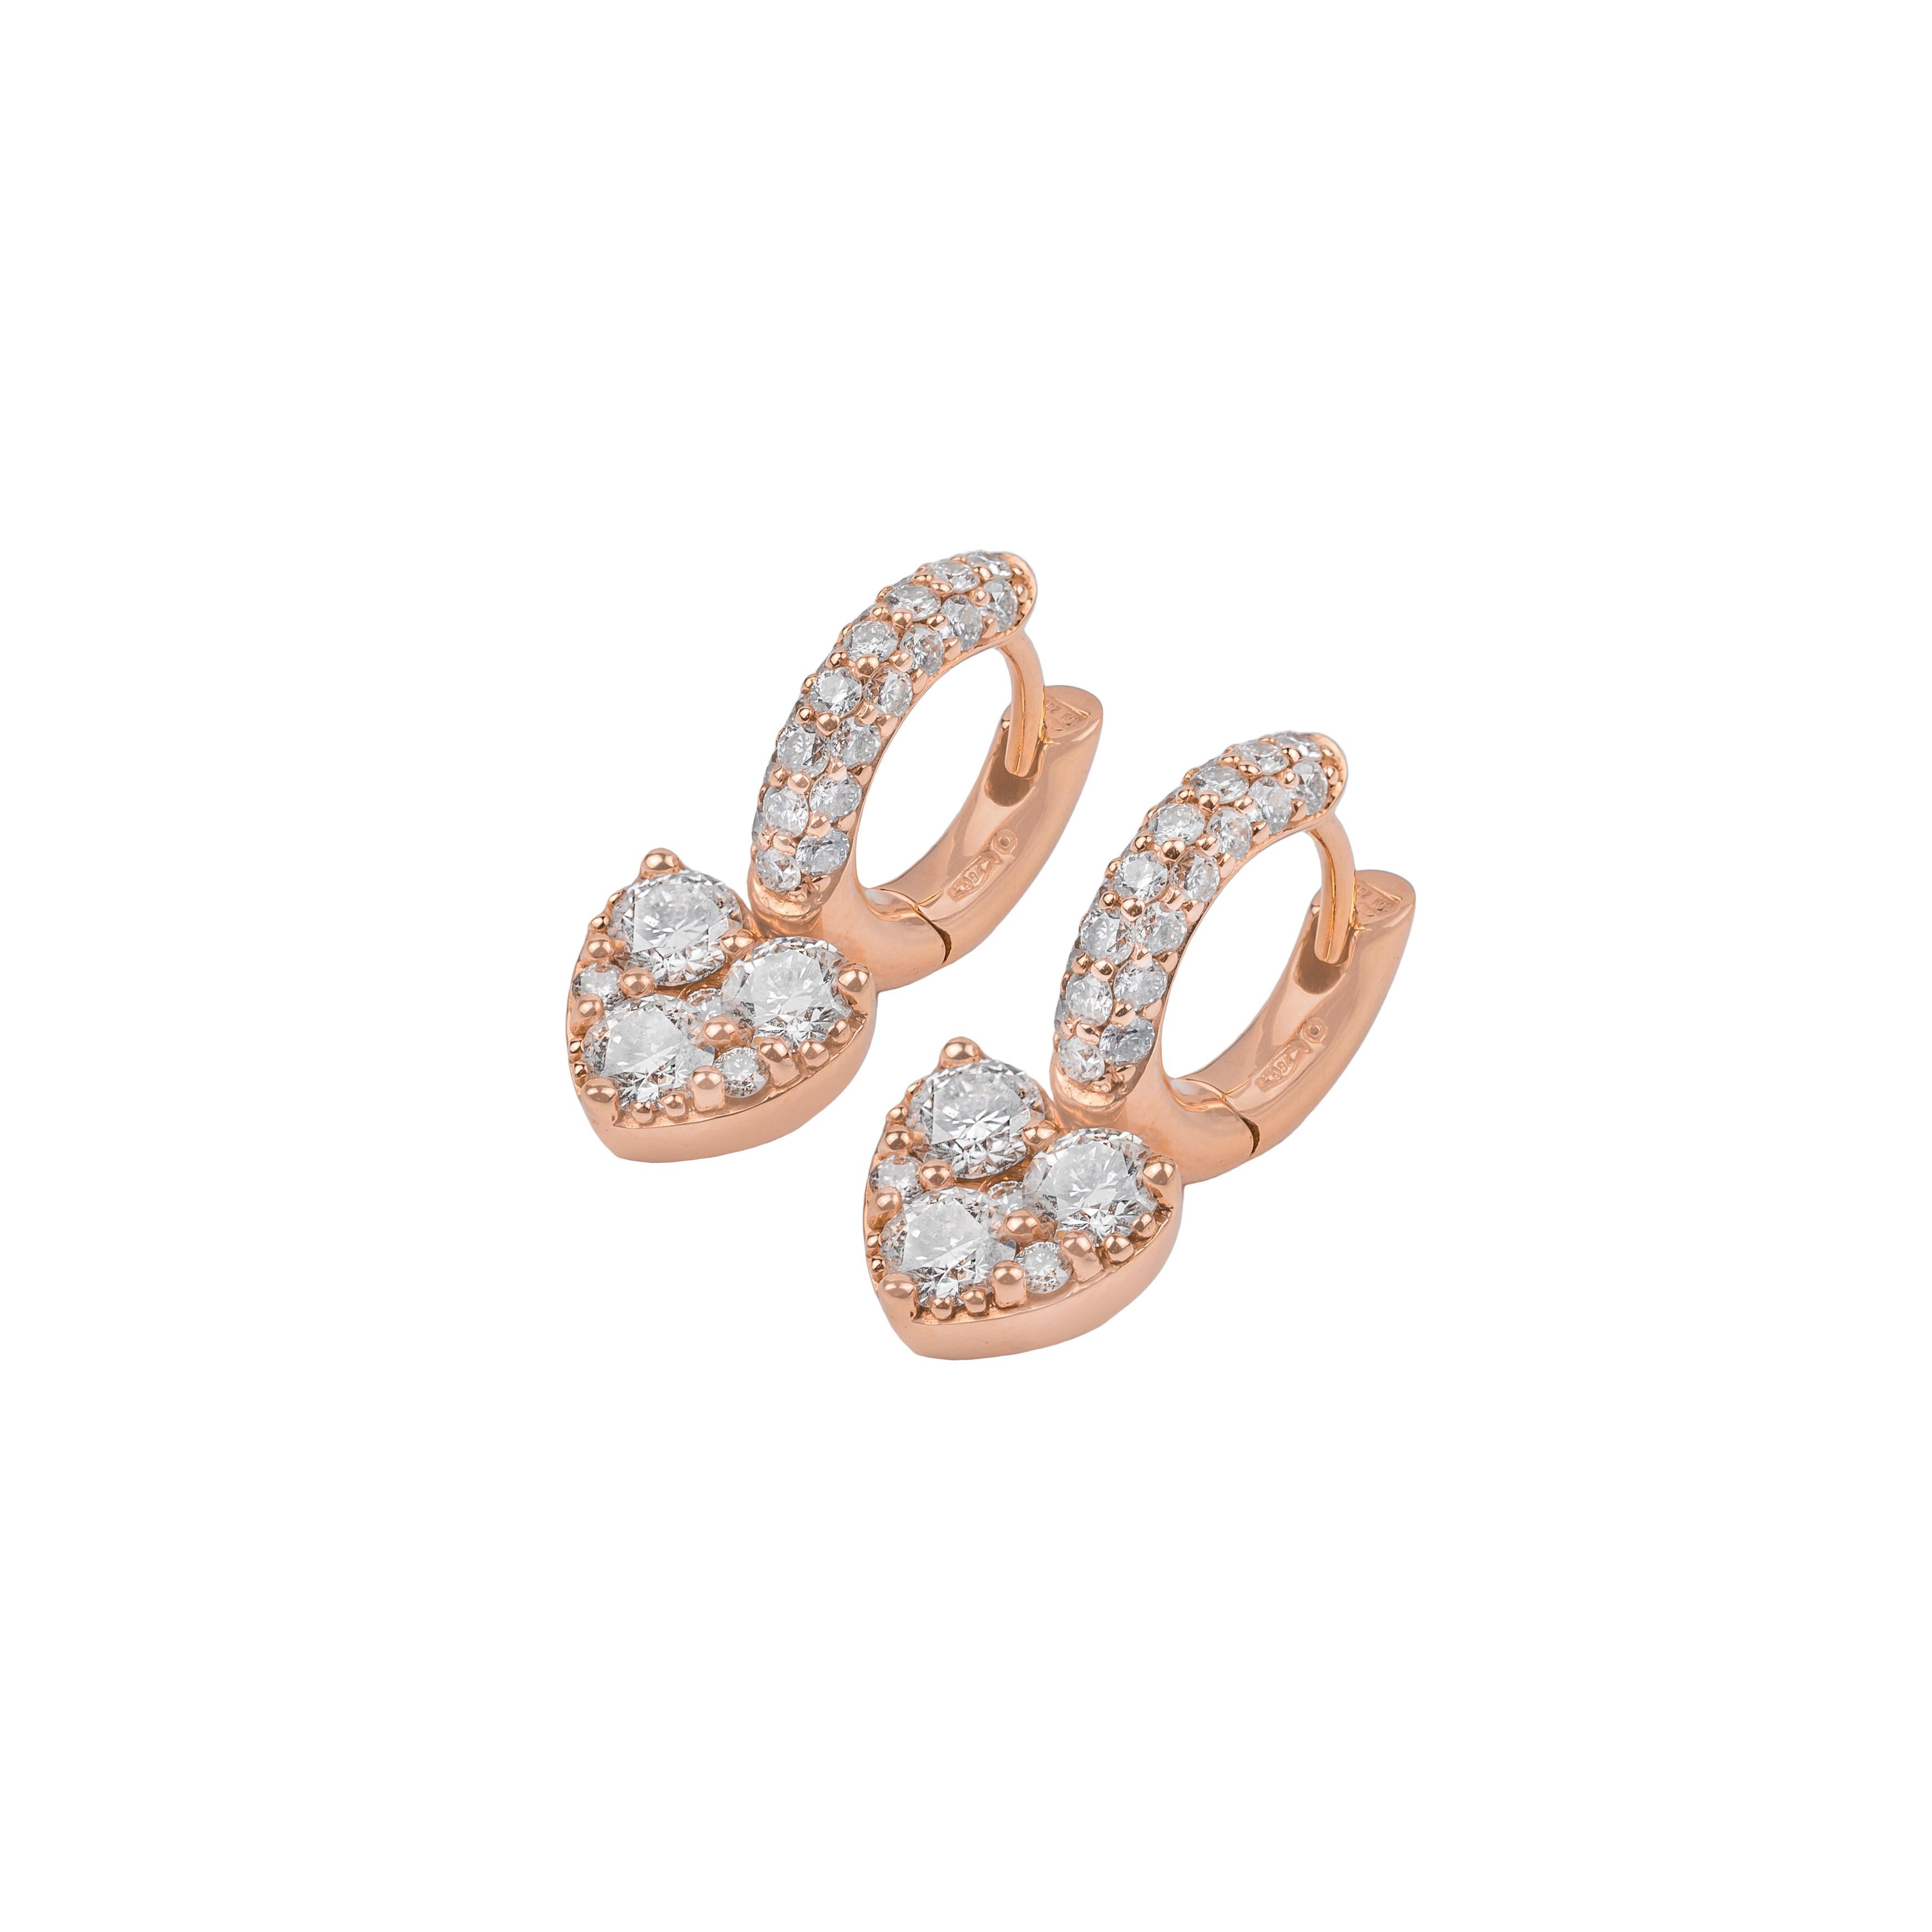 These elegant 18k rose gold and diamonds earrings are made in Italy by Fanuele Gioielli.
They features a heart shaped pendant covered with 6 brilliant cut white diamonds, of which three larger.
There are also white diamonds on the front of the